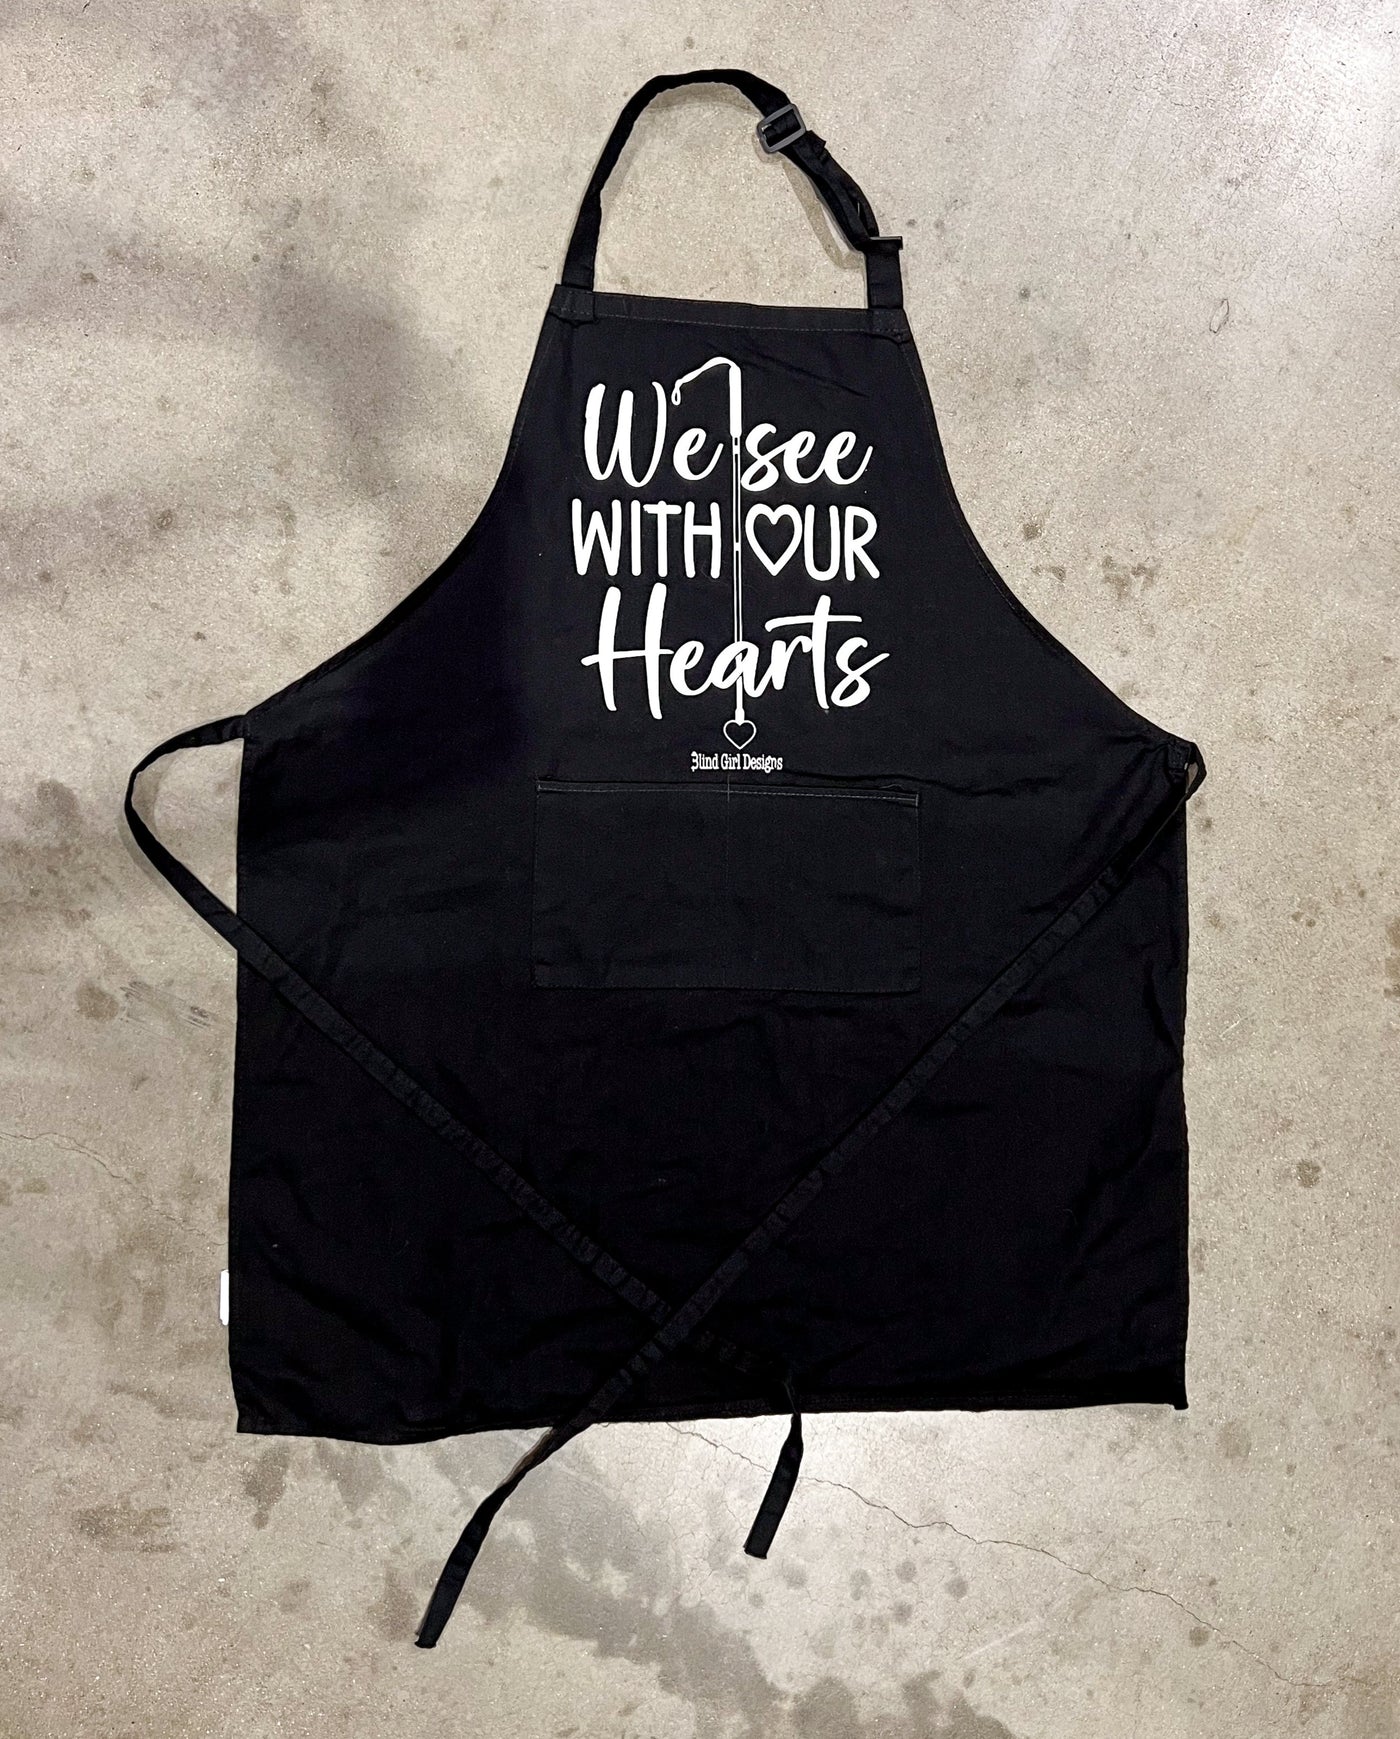 There is a big patch pockets on the front. This apron features our best selling "We See With Our Hearts" print on the front! There is a white cane running down the stack of words.